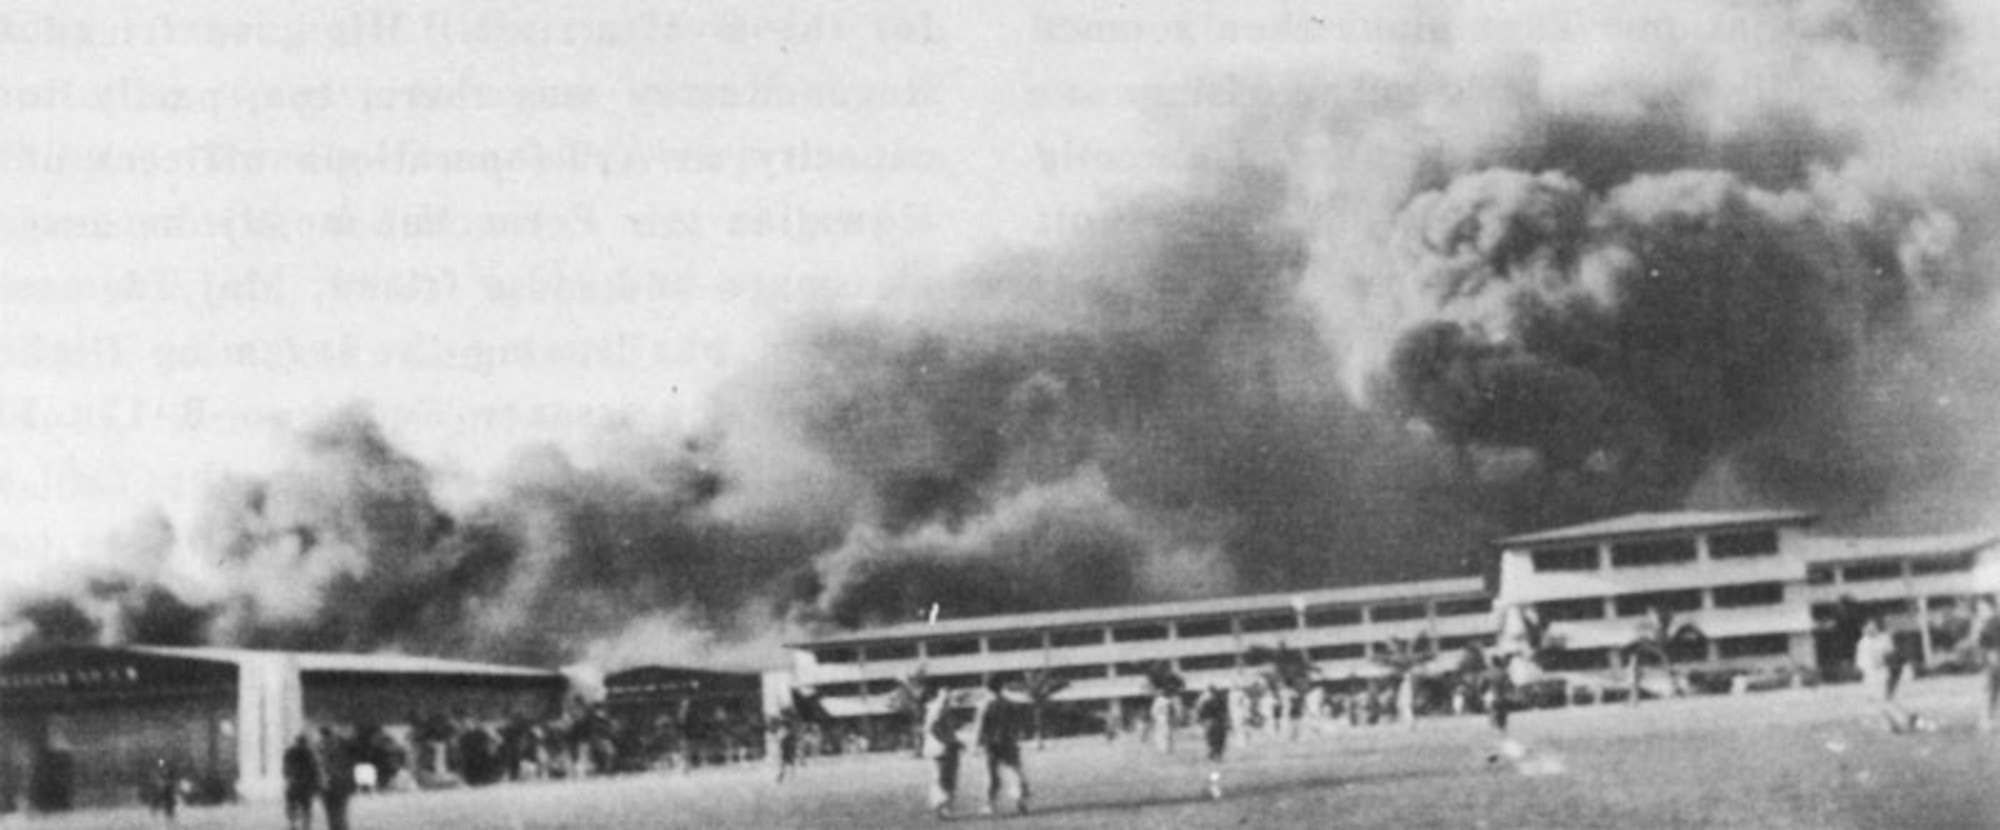 The first bombs to strike Hickam Field Dec. 7, 1941 were dropped on Hawaiian Air Depot buildings and the hangar line, causing thick clouds of smoke to billow upward. (Courtesy photo, John W. Wilson)   